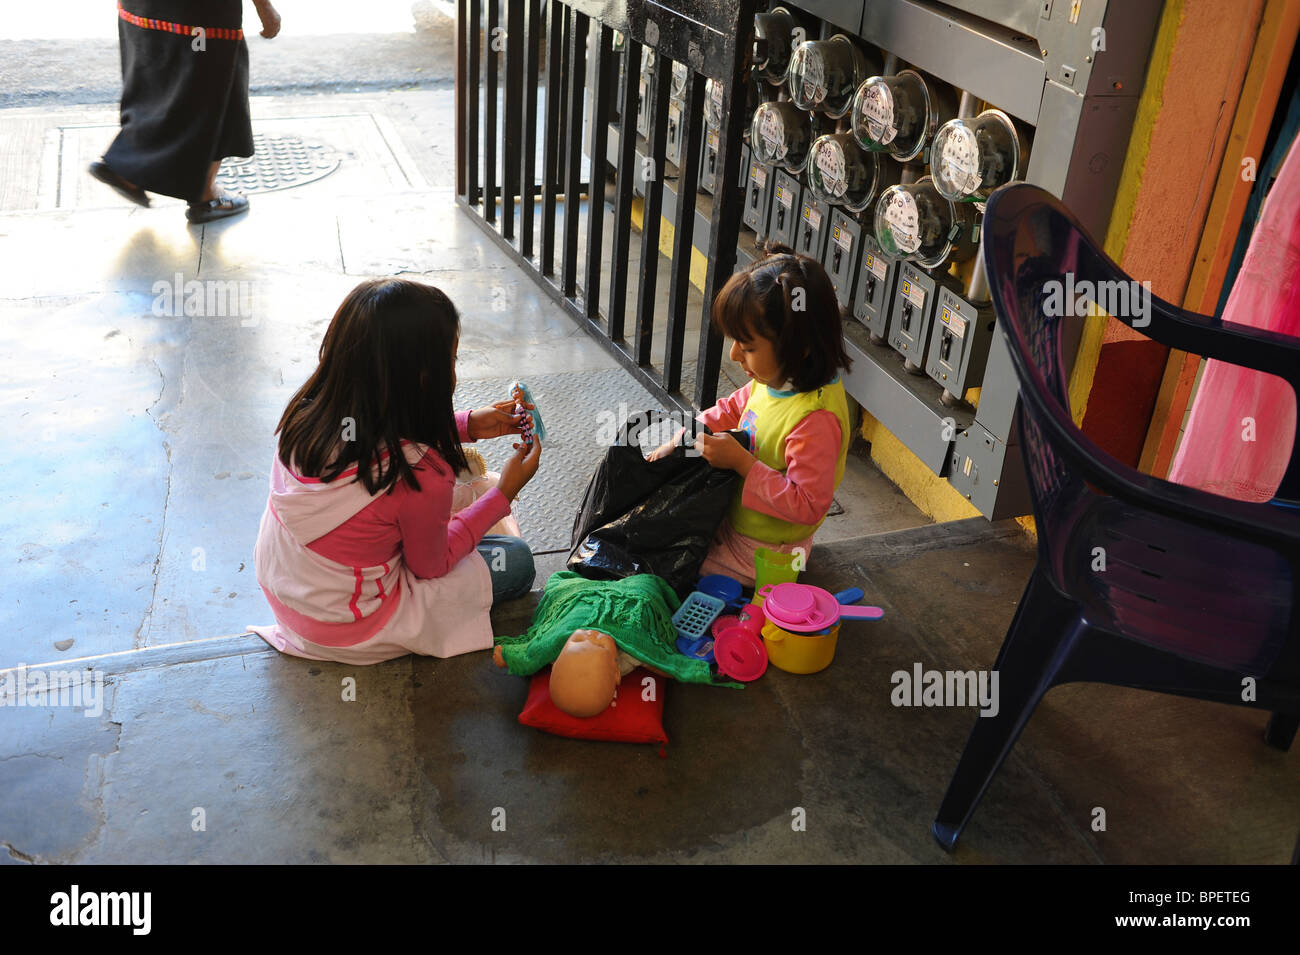 Two girls 5-6 years play with doll in entrance to market. Oaxaca, Mexico. Stock Photo